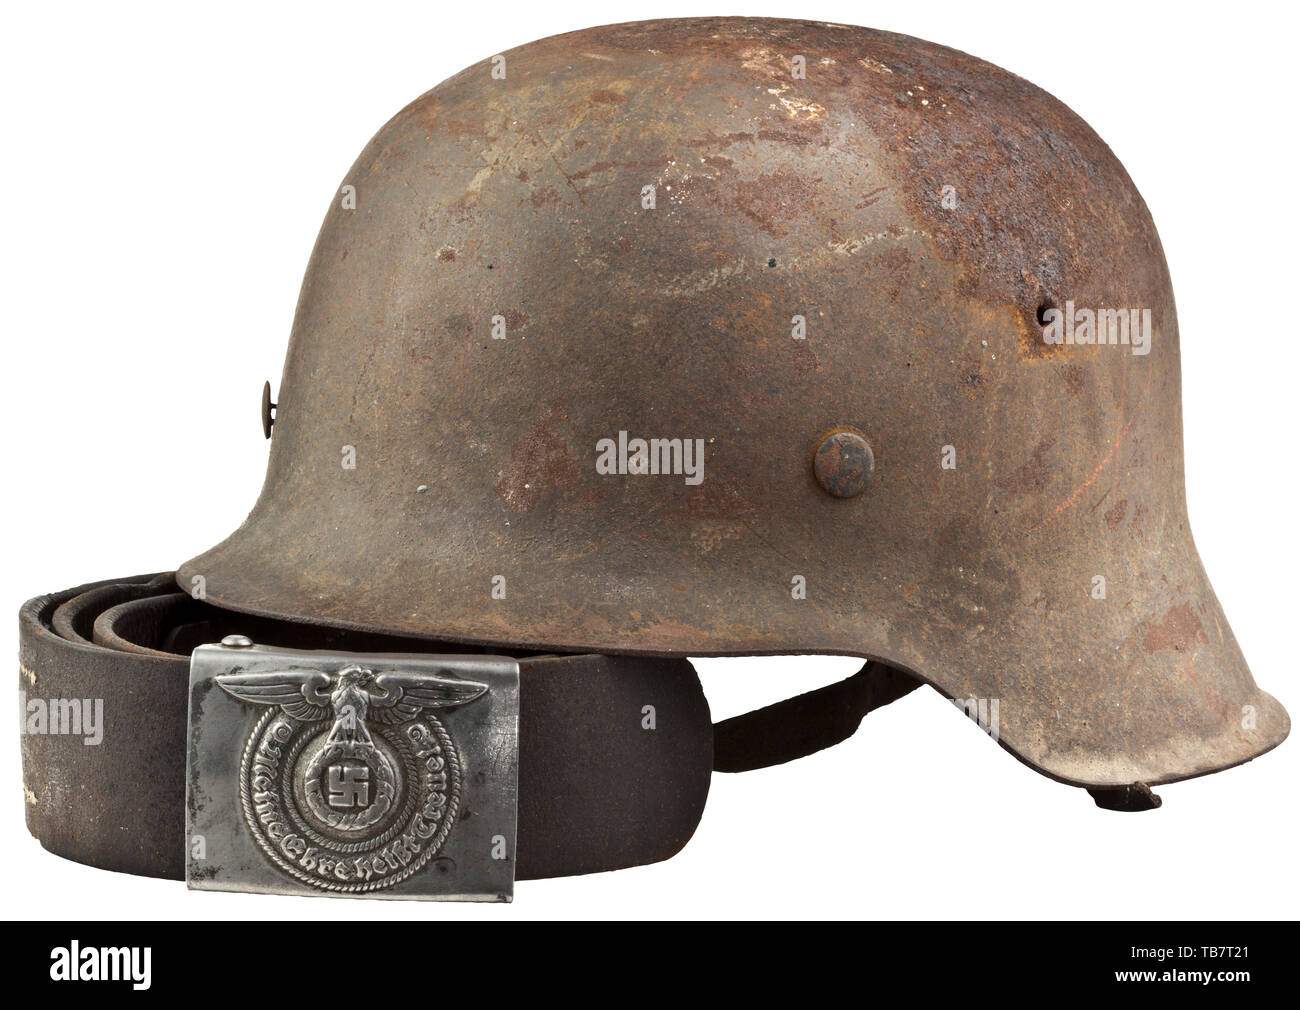 Body armour, helmets, German steel helmet M42, issued 1942, Waffen-SS  pattern, with waist belt, Editorial-Use-Only Stock Photo - Alamy